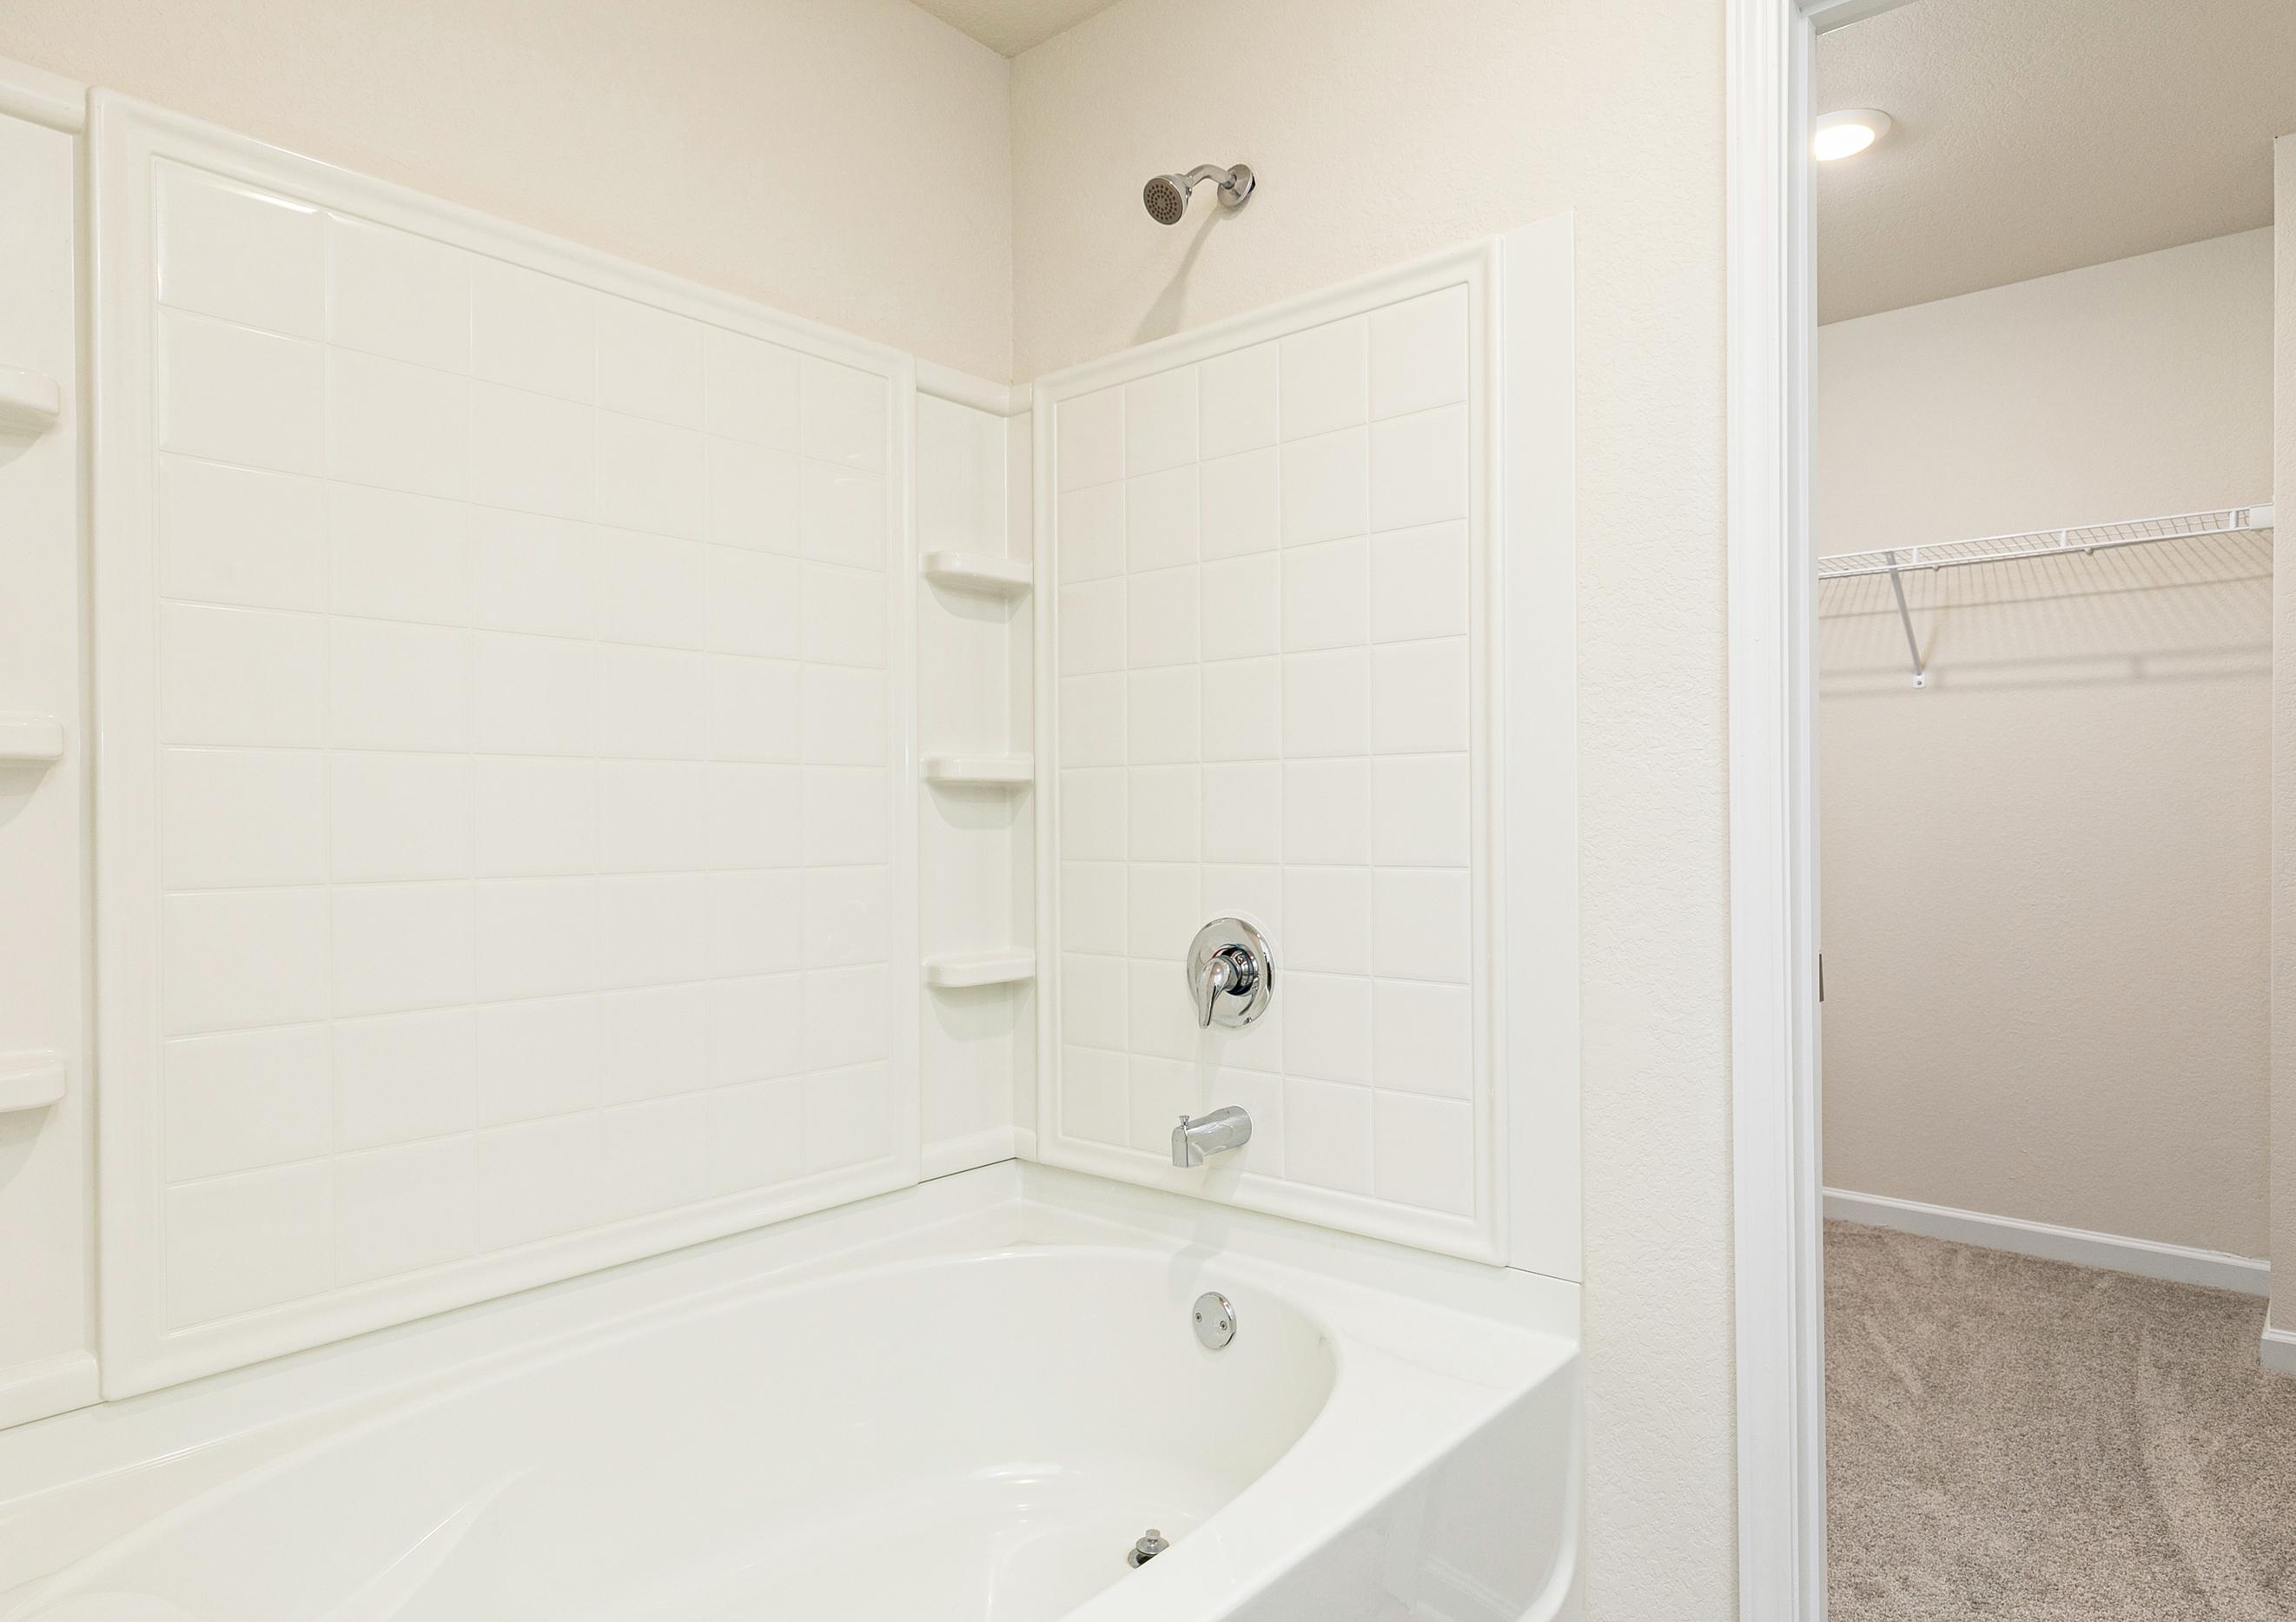 The master bathroom comes with a separate shower and bathtub